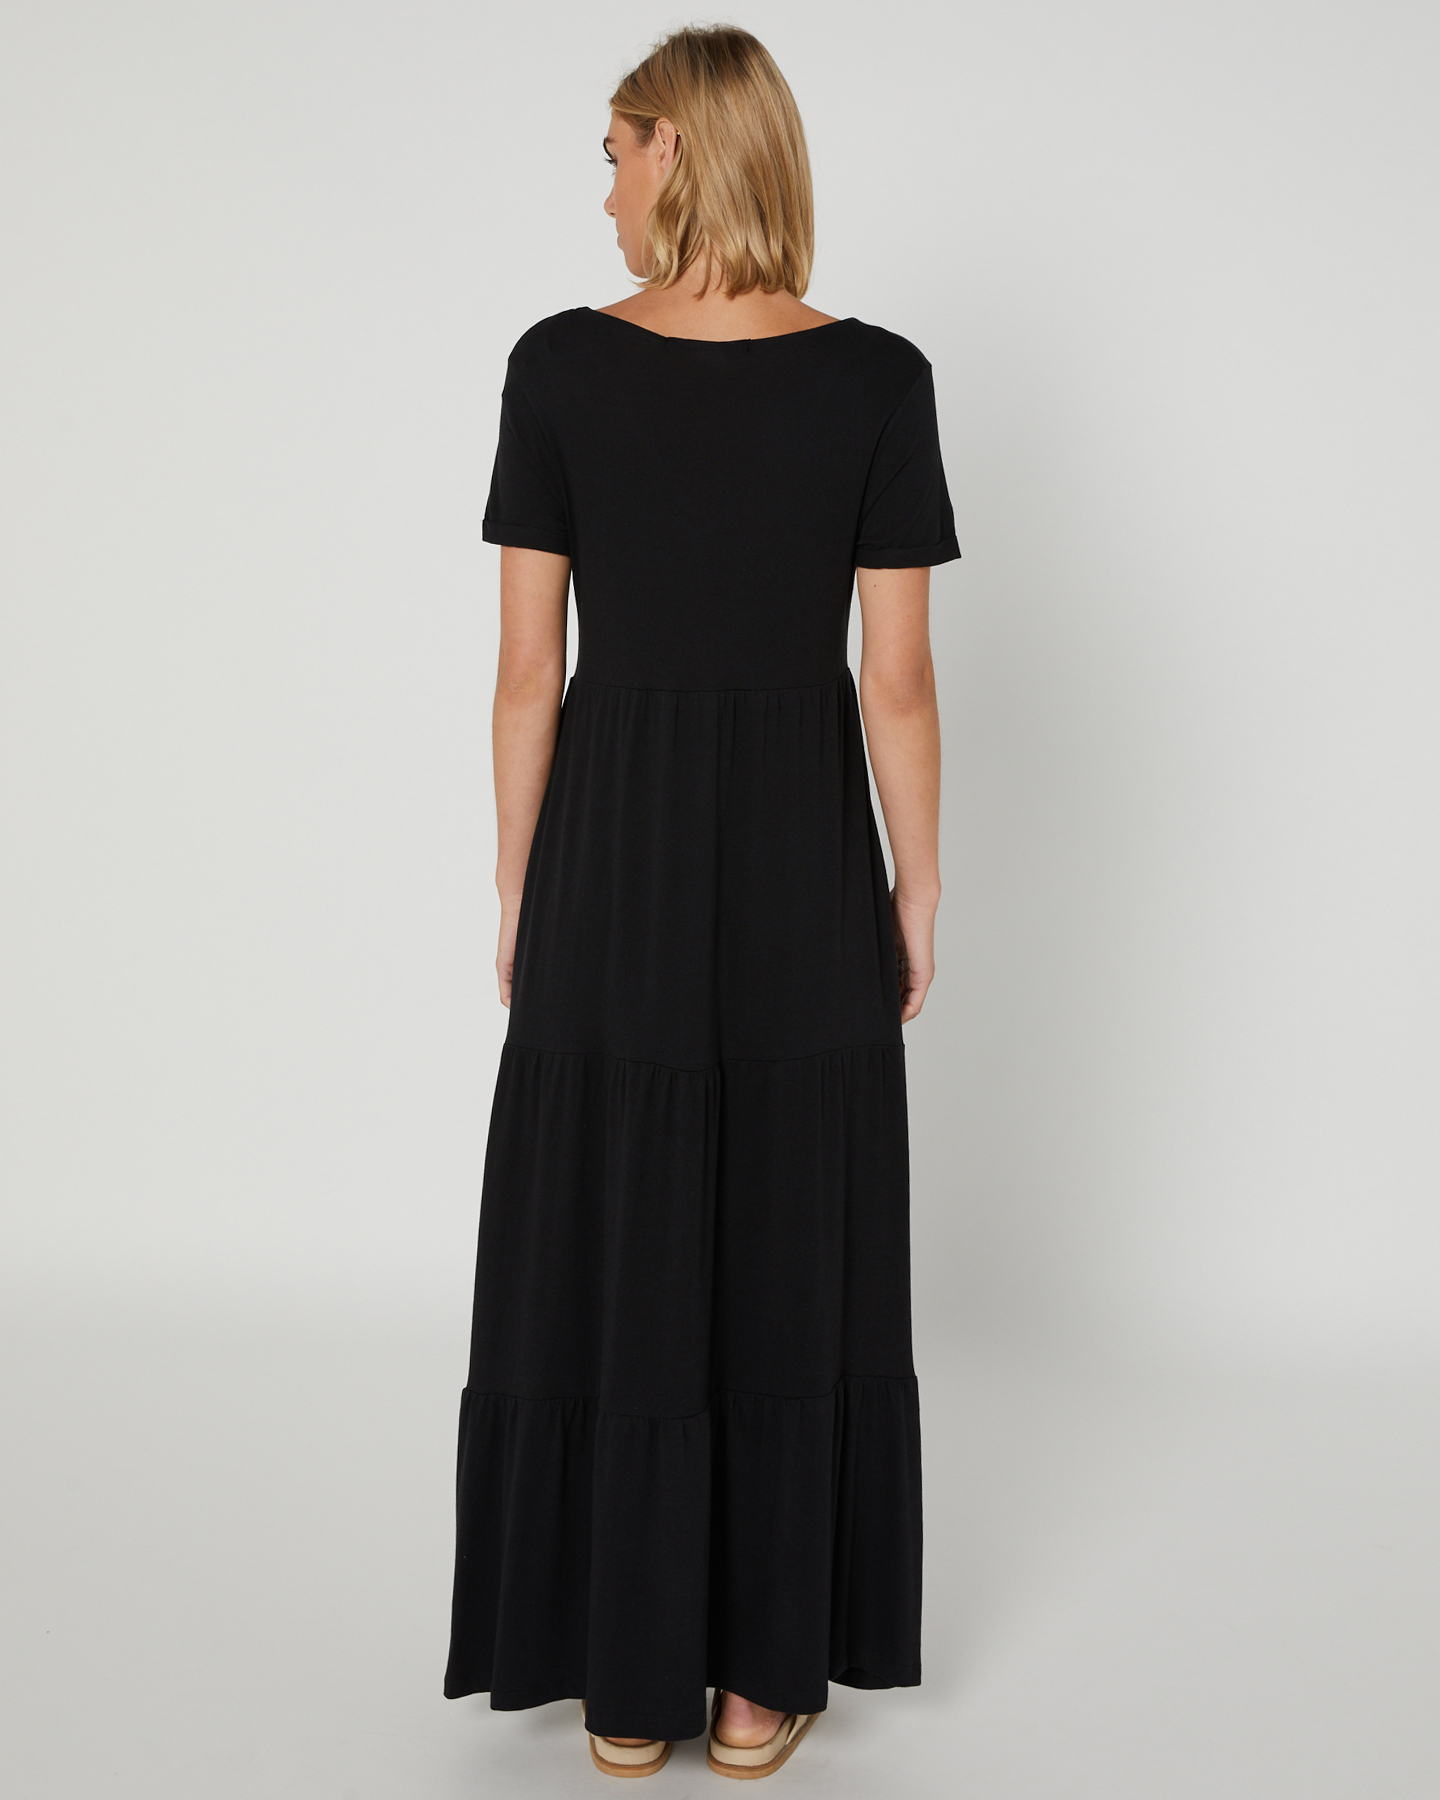 Silent Theory Lola Tiered Dress - Black | SurfStitch